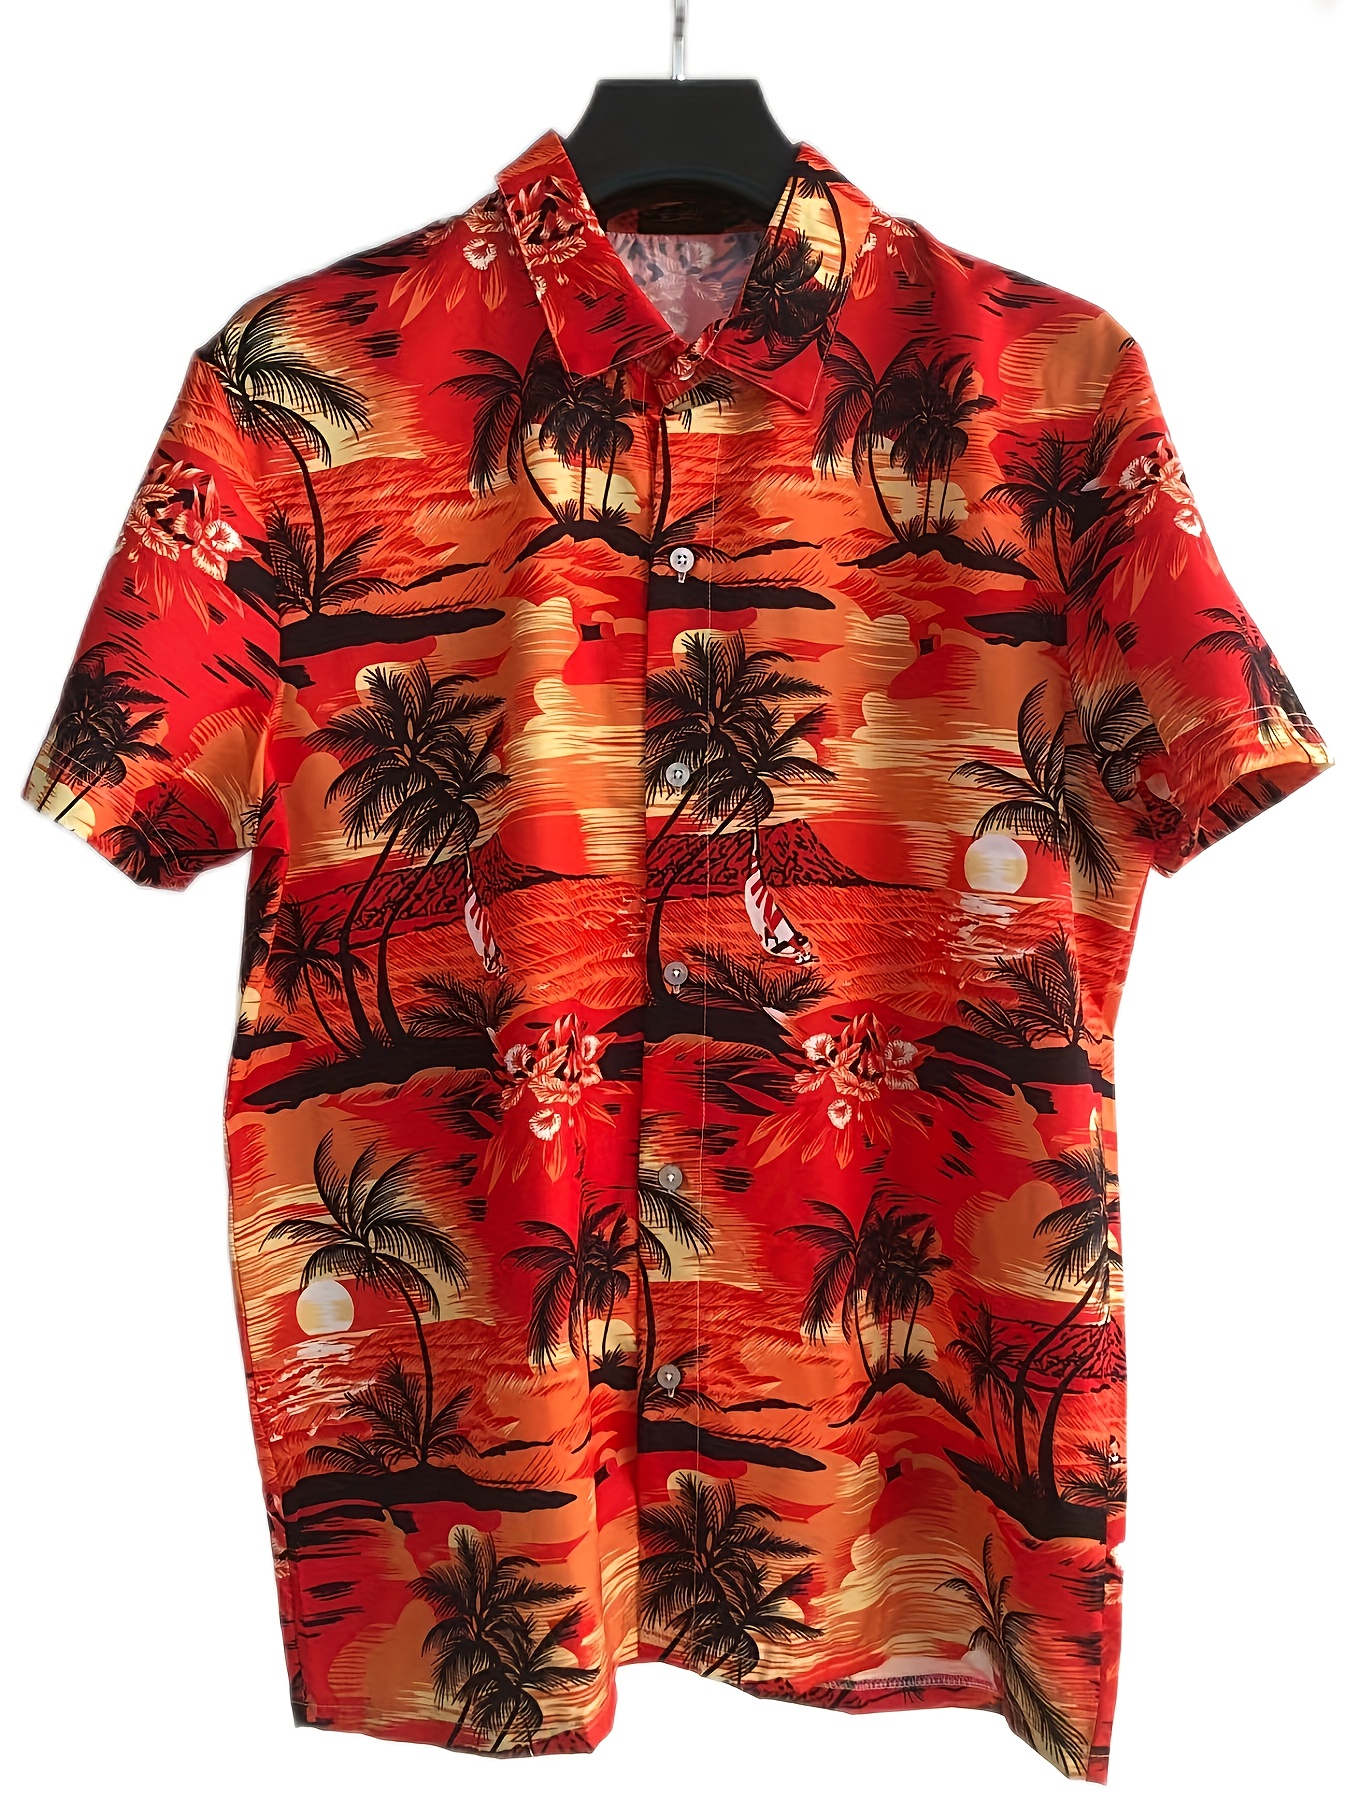 mens hawaiian shirt tropical island pattern short sleeves casual button up for vacation and beach resorts details 2